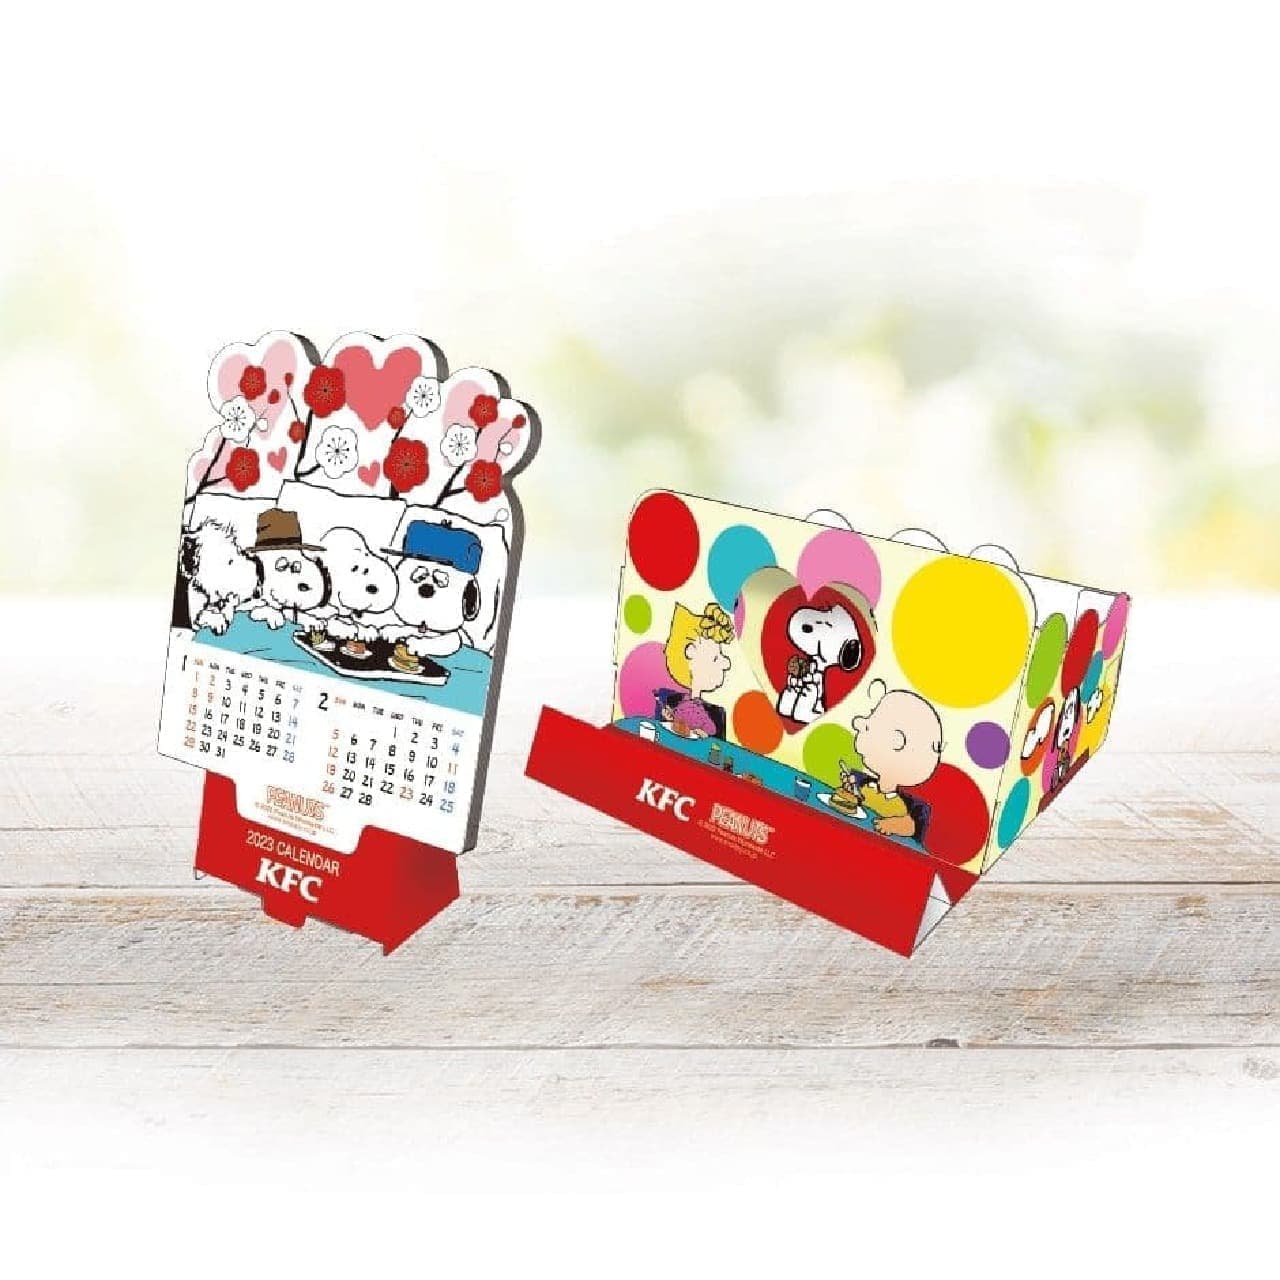 Kentucky Fried Chicken Snoopy Kids Goods Vol. 2: "Snoopy and His Friends Calendar" and "Multi-Package Box